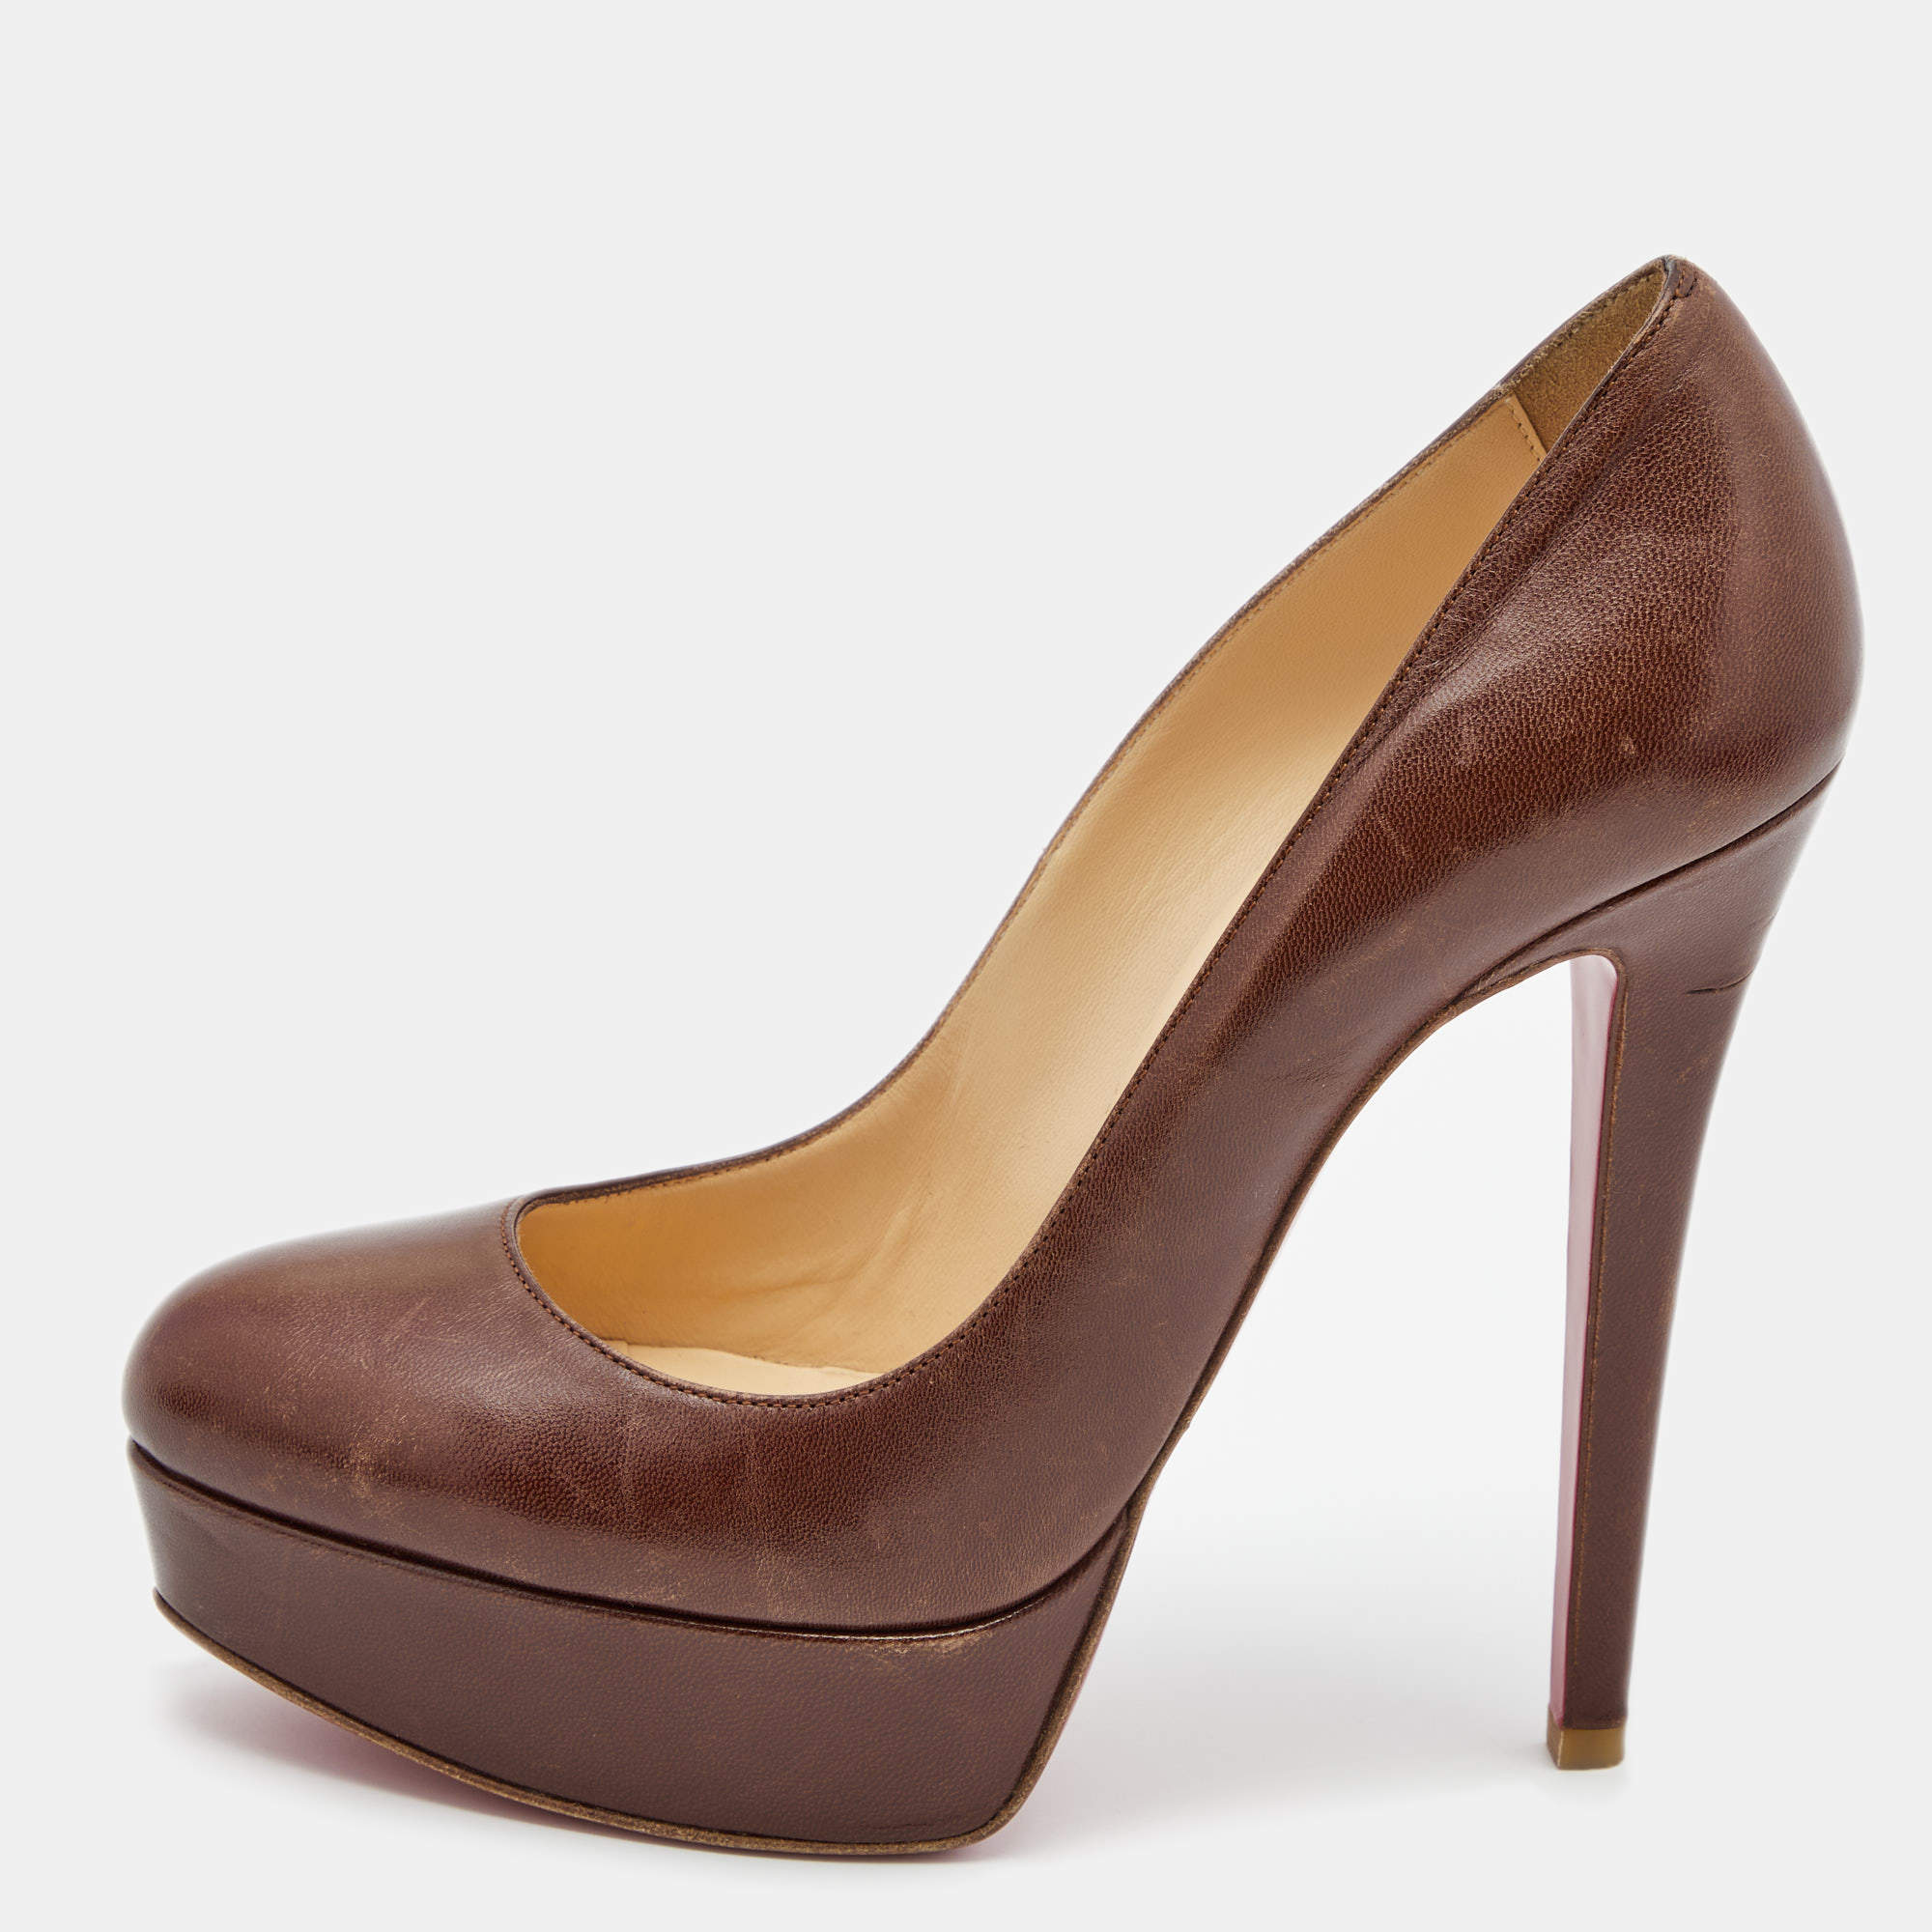 Christian Louboutin Brown Leather Bianca Pumps Size 36